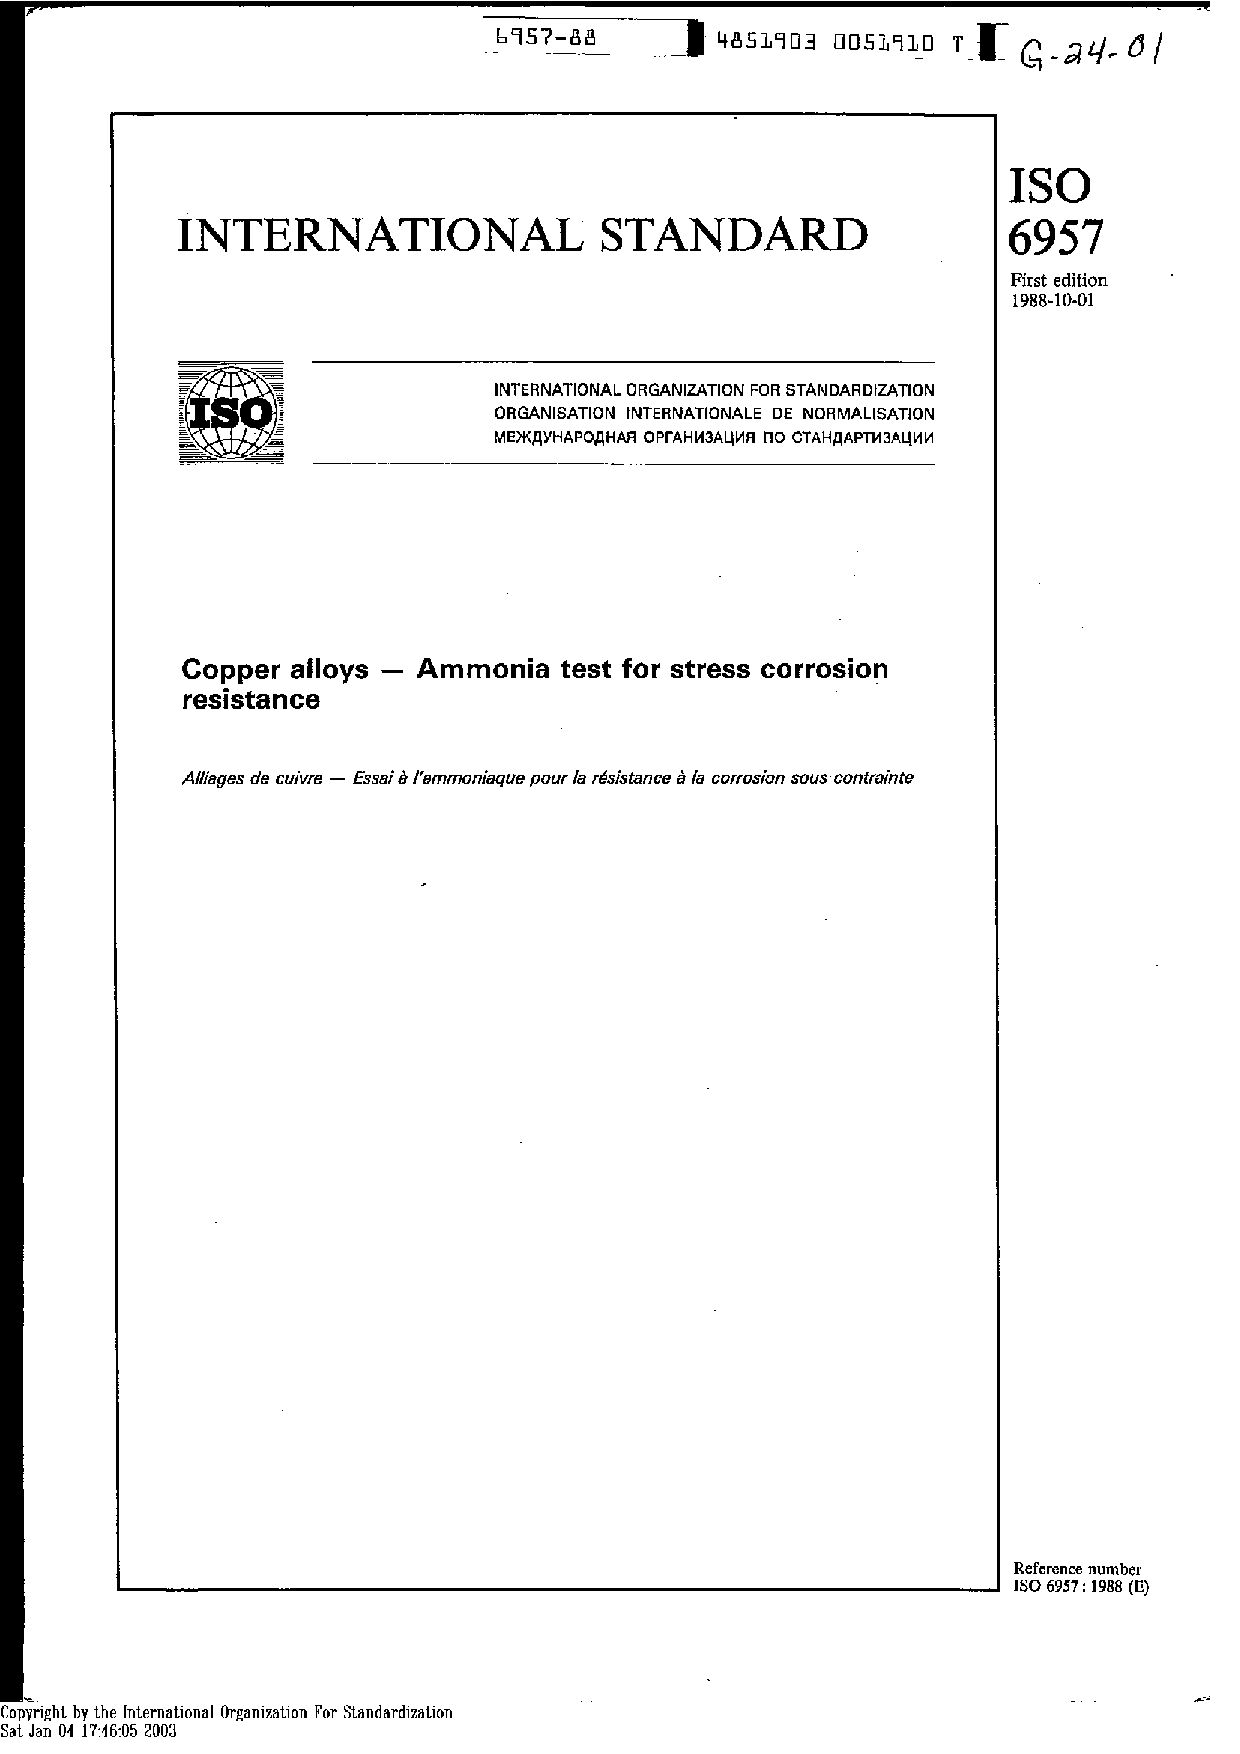 ISO 6957:1988